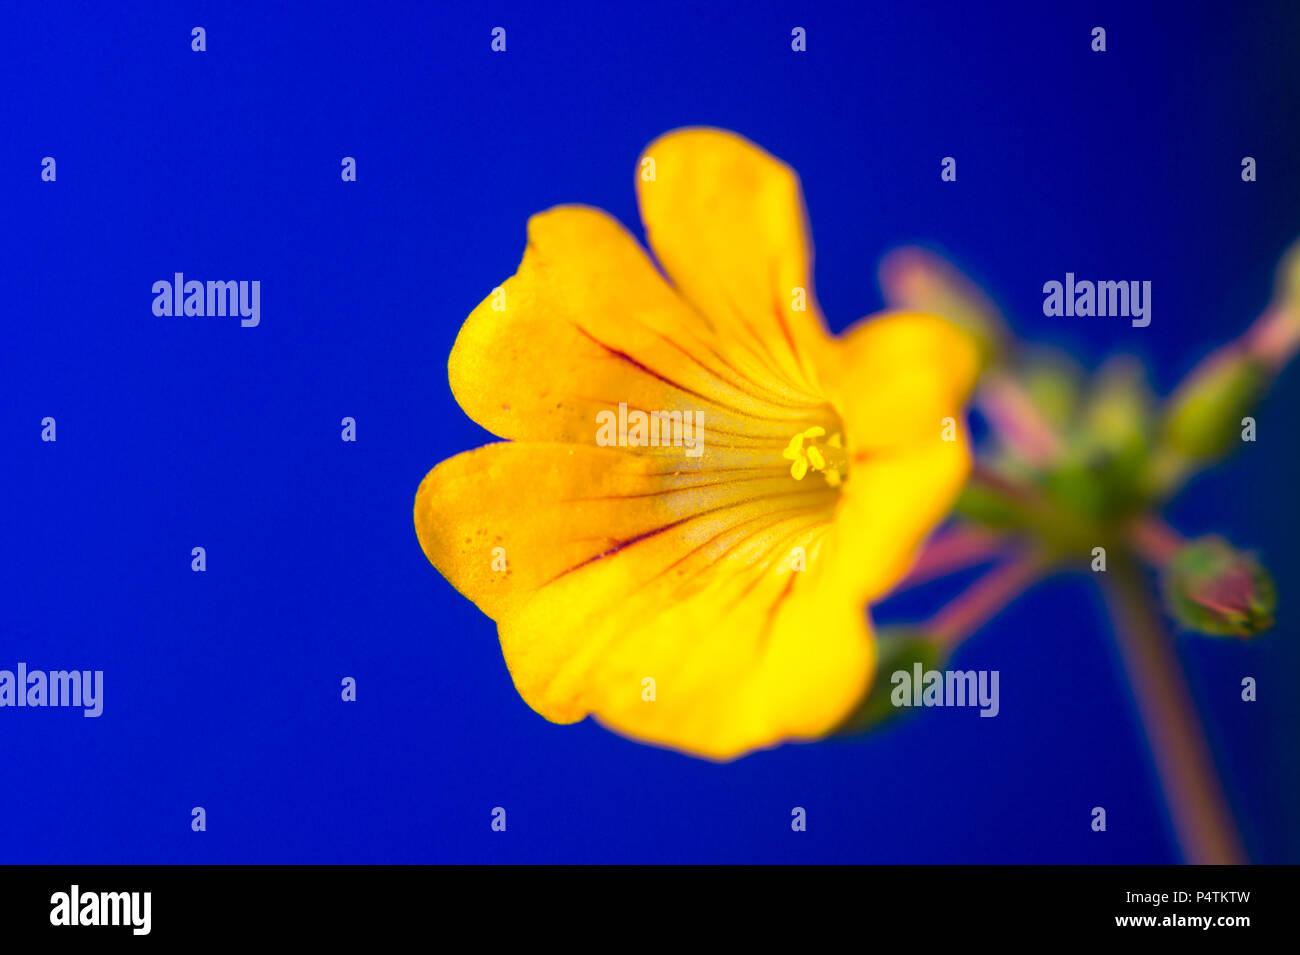 closeup photo of little tree plant flower in blue background Stock Photo